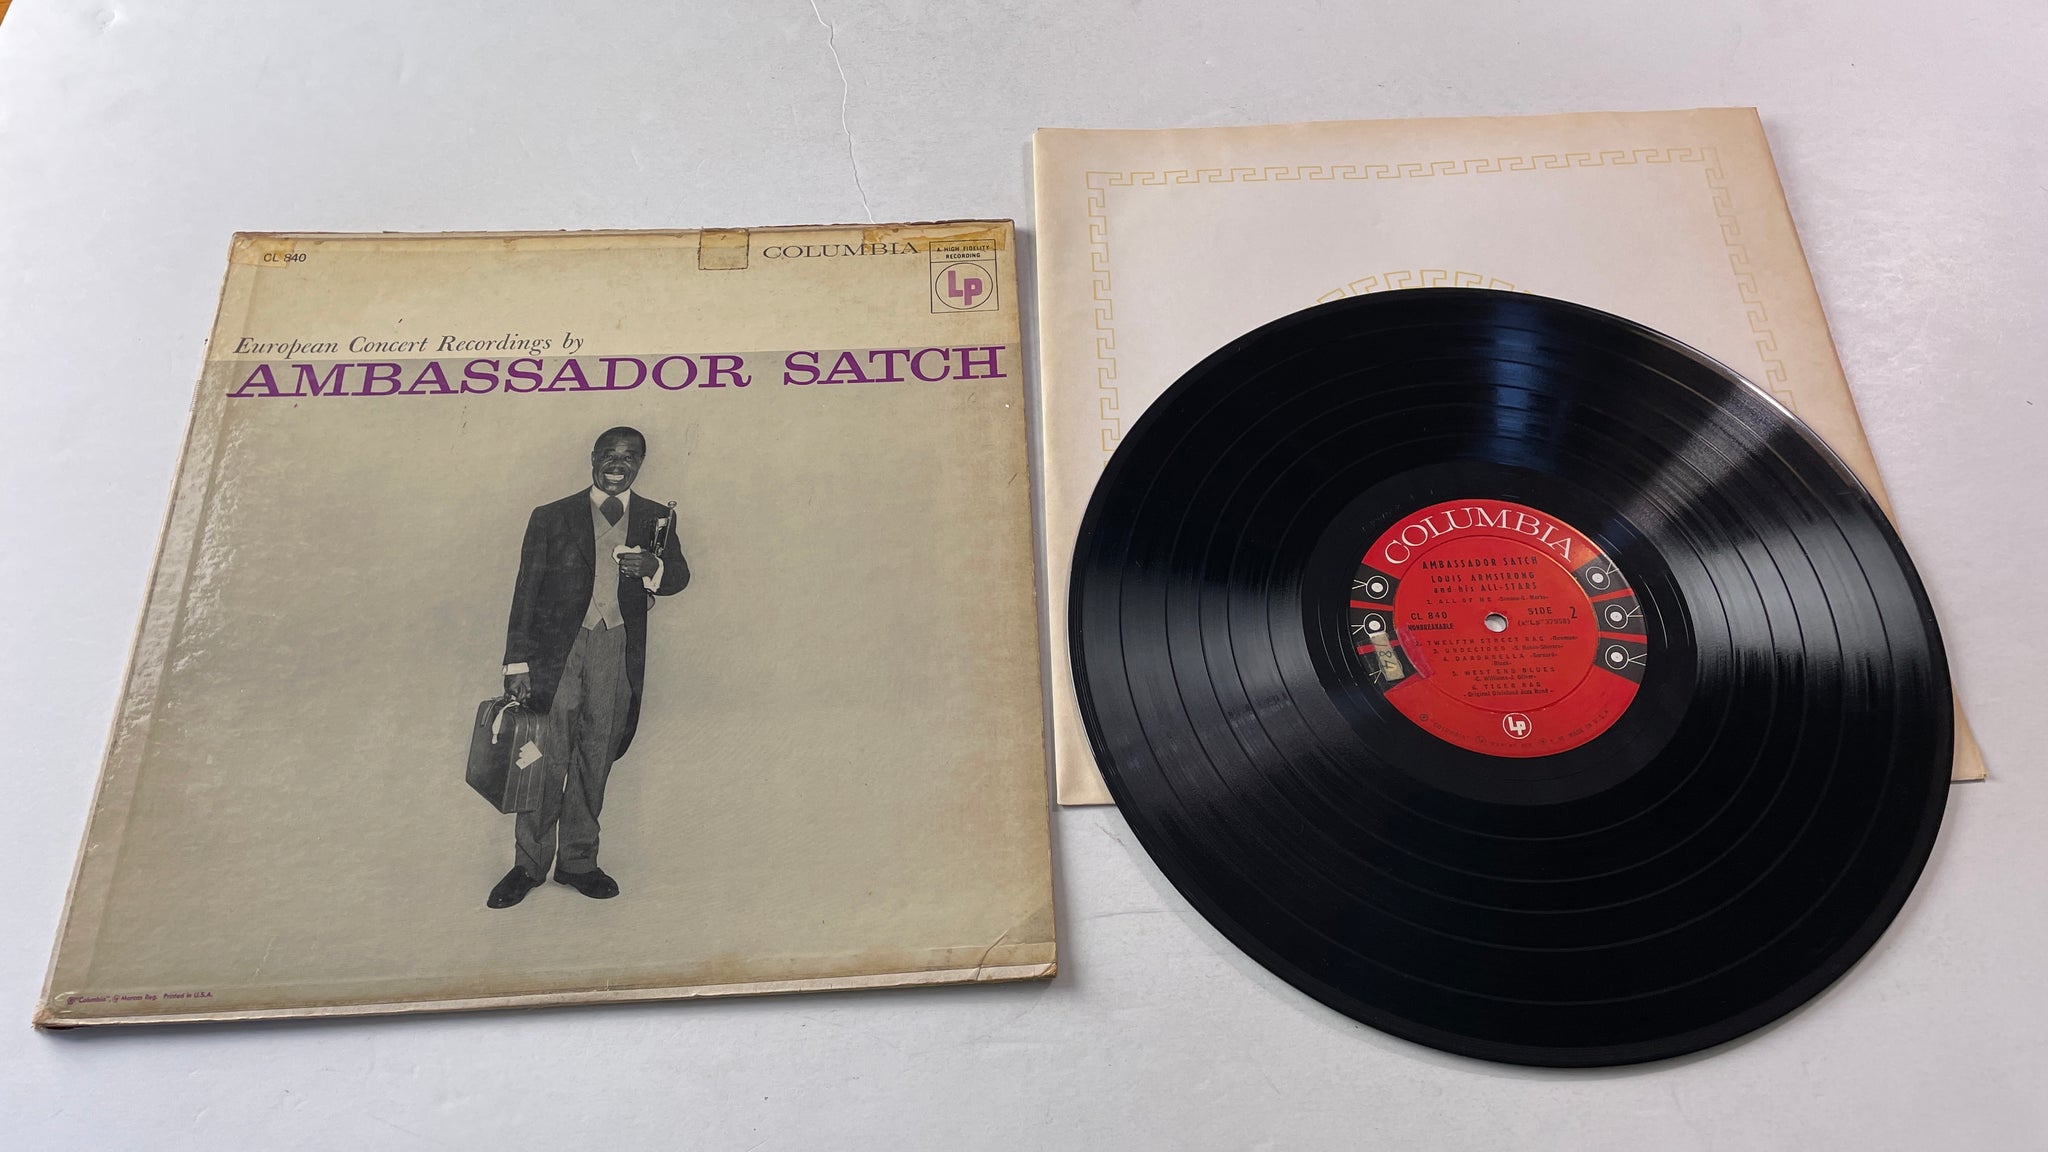 Louis Armstrong And His All-Stars - Ambassador Satch / [CL 840] Vinyl